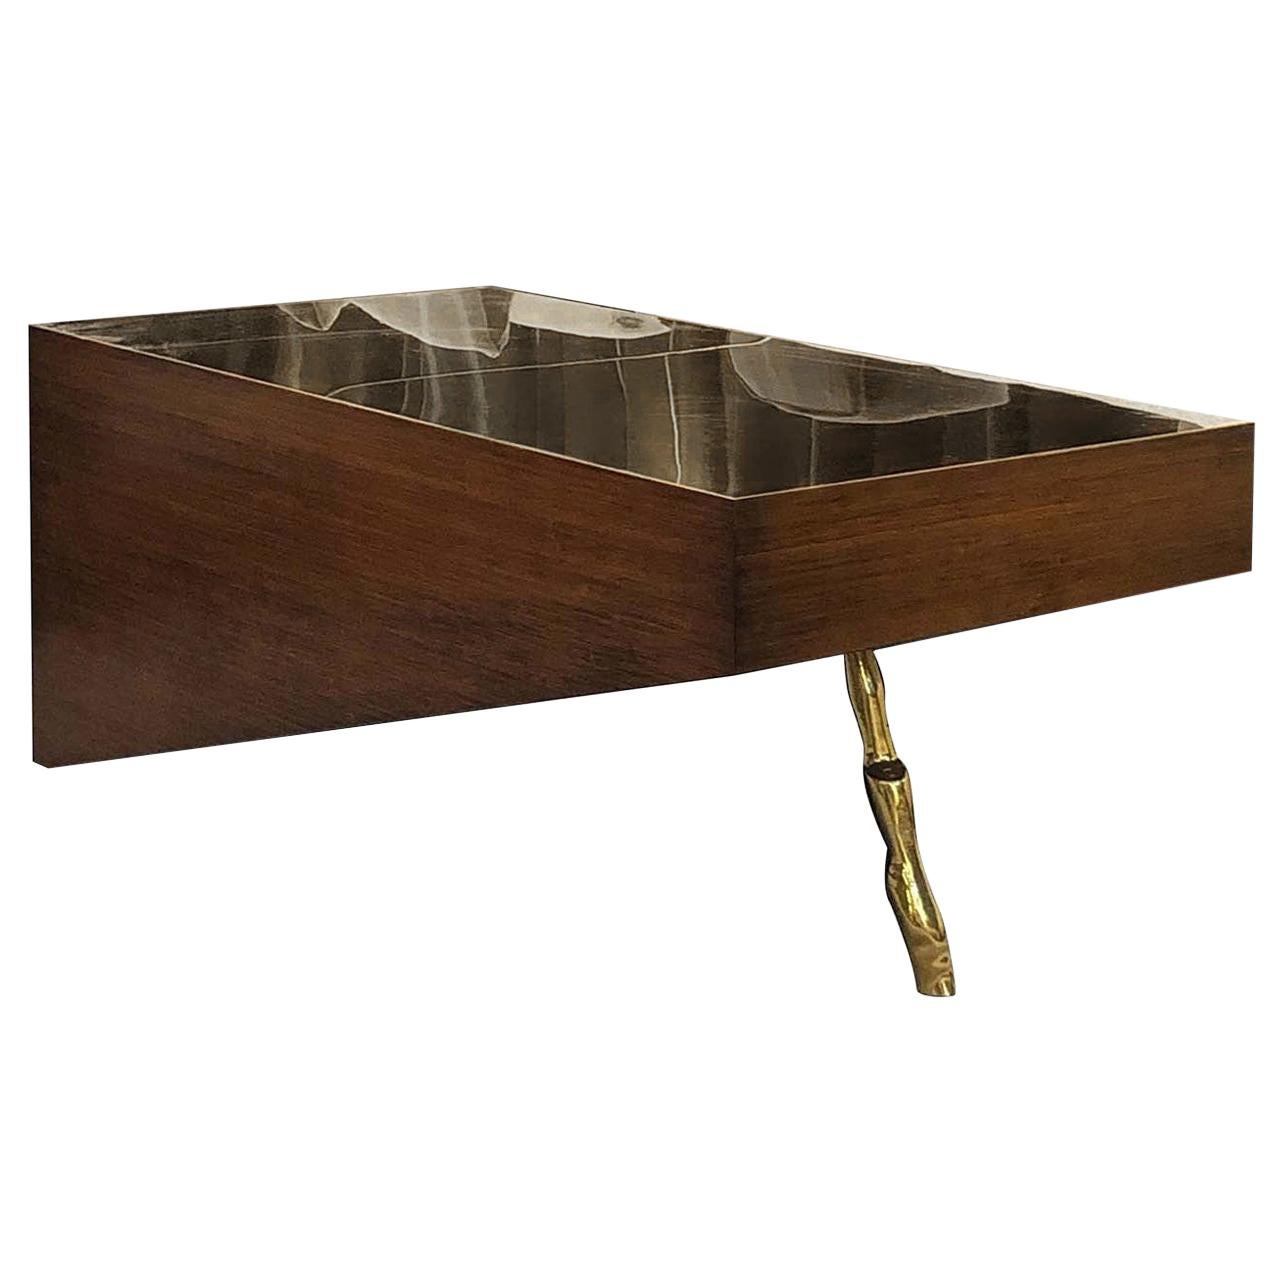 D/Zen Rectangular Coffee Table Gold and Brown by CTRLZAK For Sale